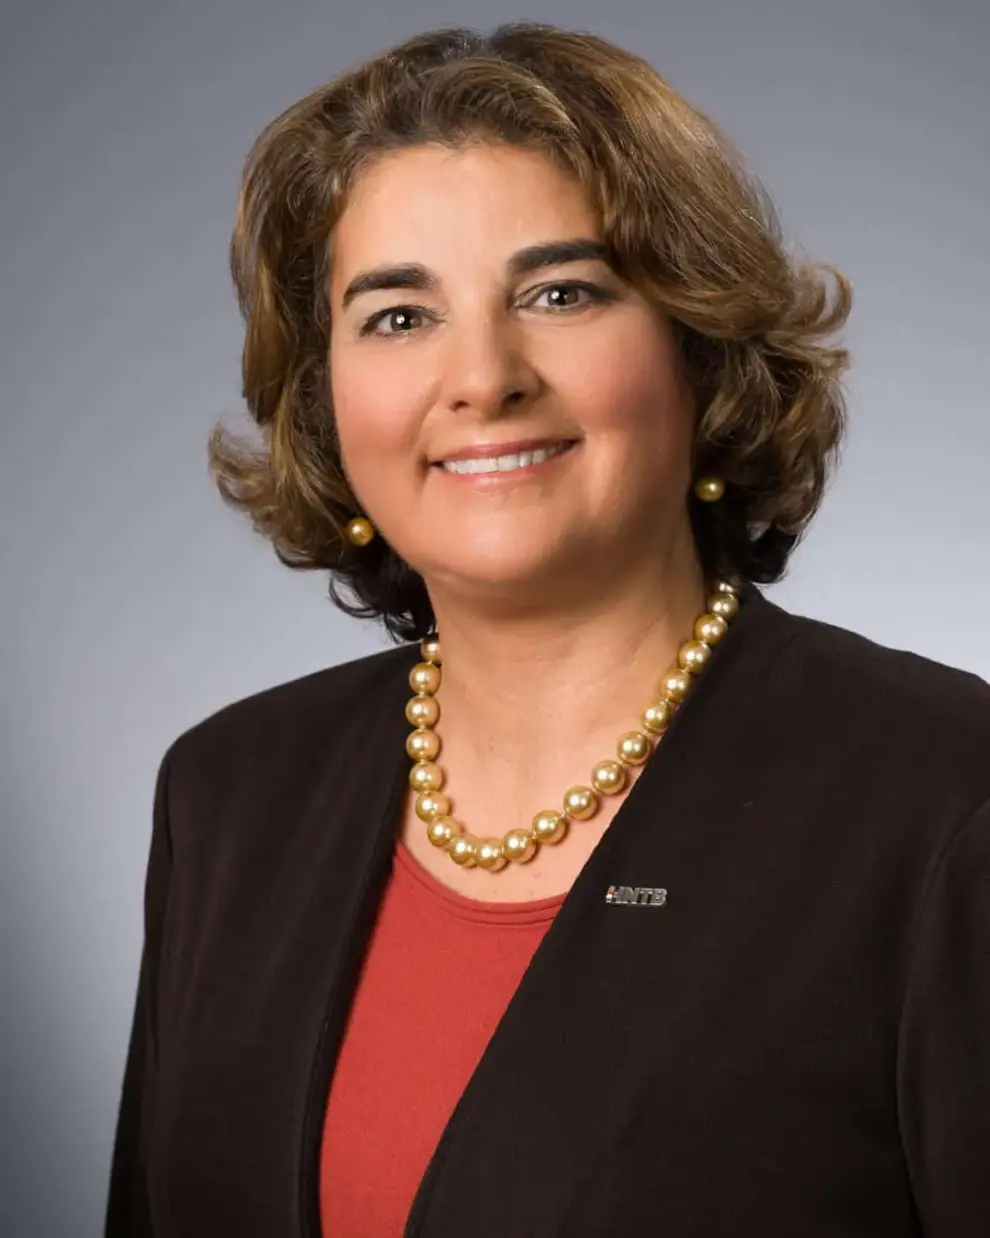 HNTB names Diana Mendes as corporate president of infrastructure and mobility equity